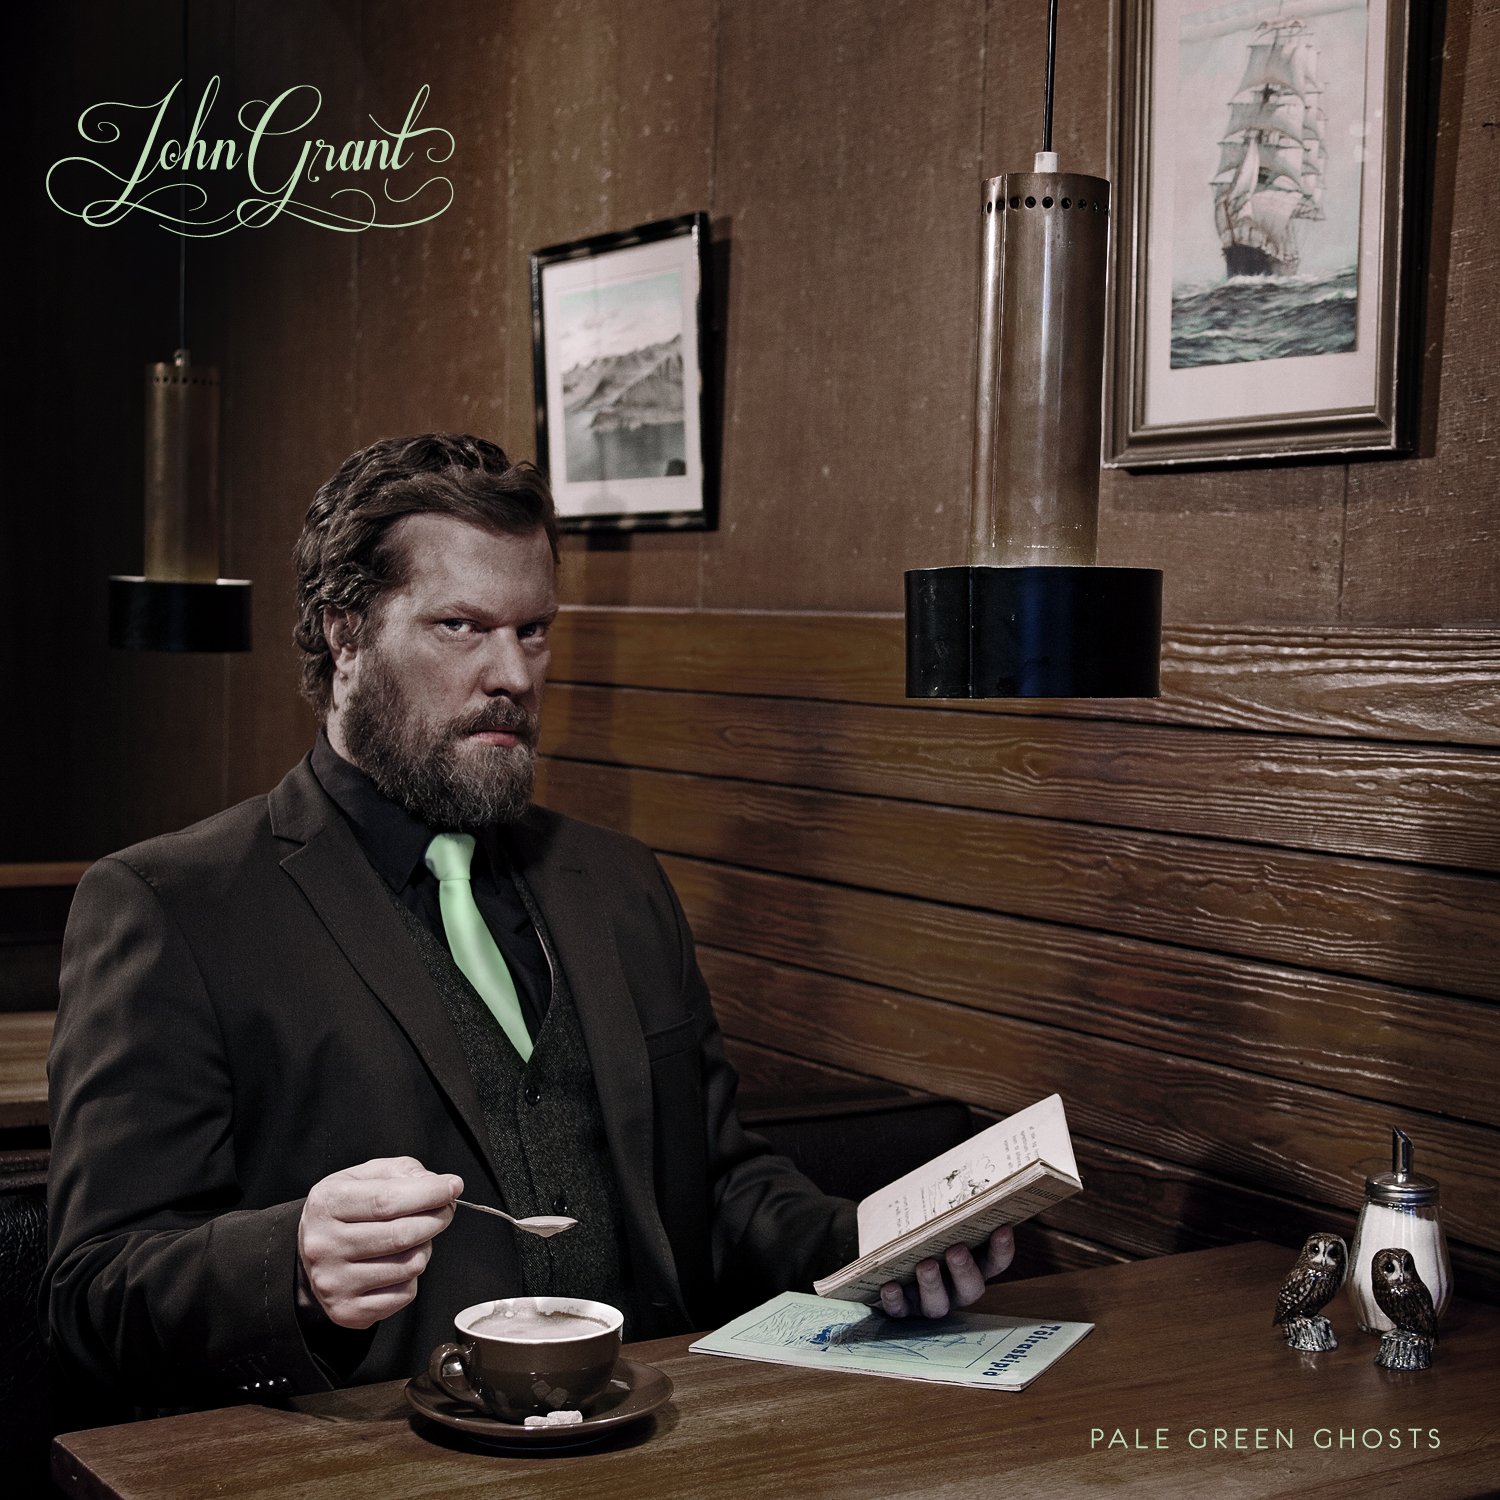 John Grant/Pale Green Ghosts (Limited Edition) (3 CD) (2013) 320 kbps + Covers + Booklet